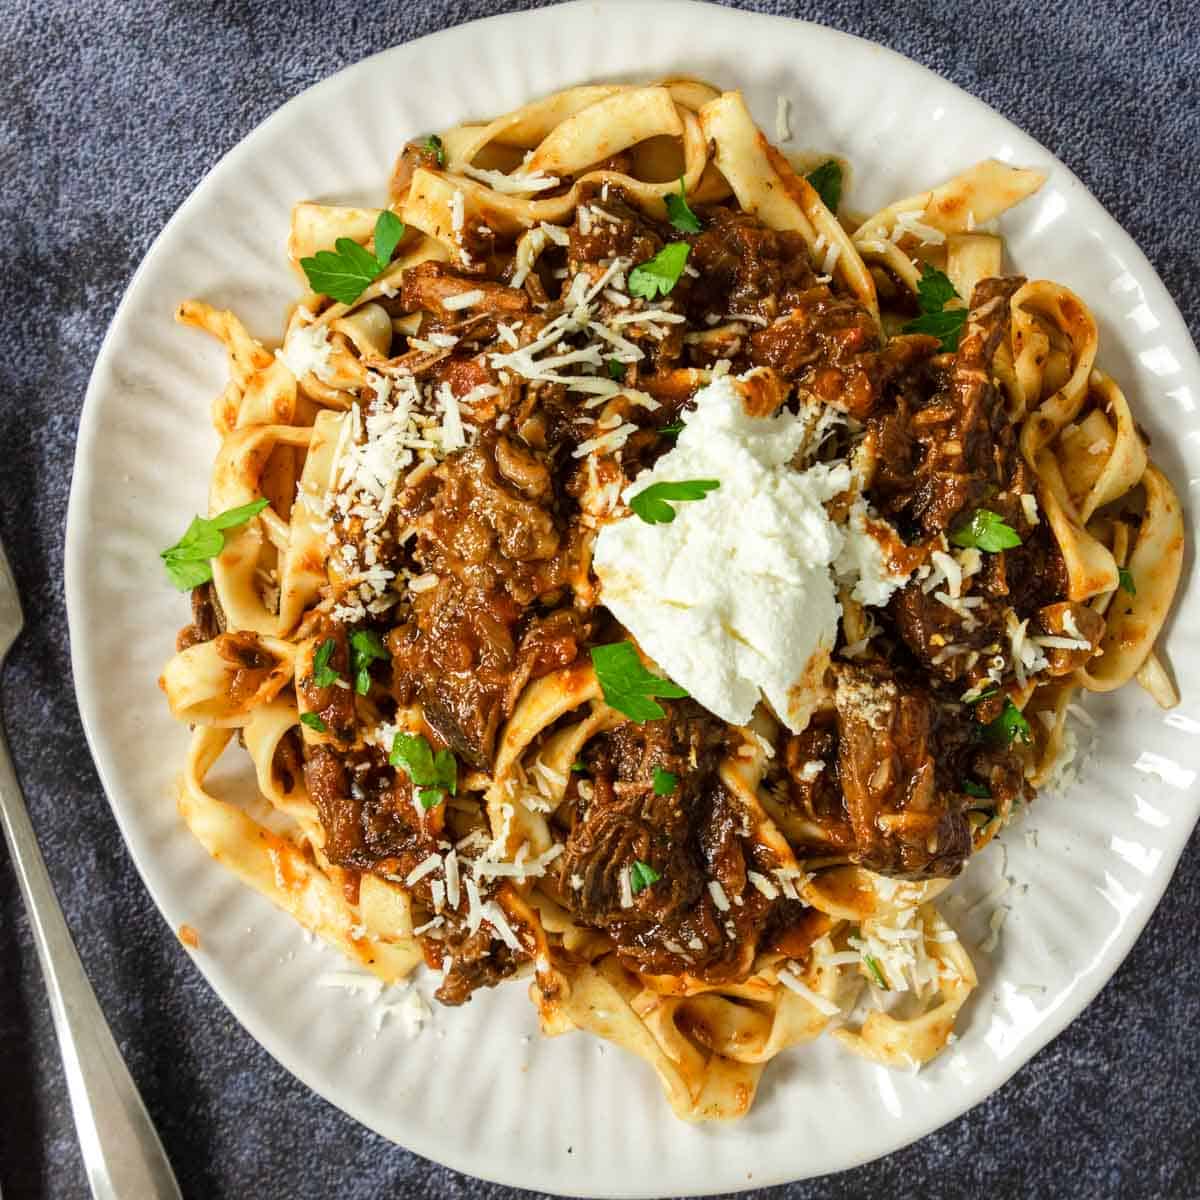 Papardelle pasta topped with beef ragu and a dallop of ricotta cheese